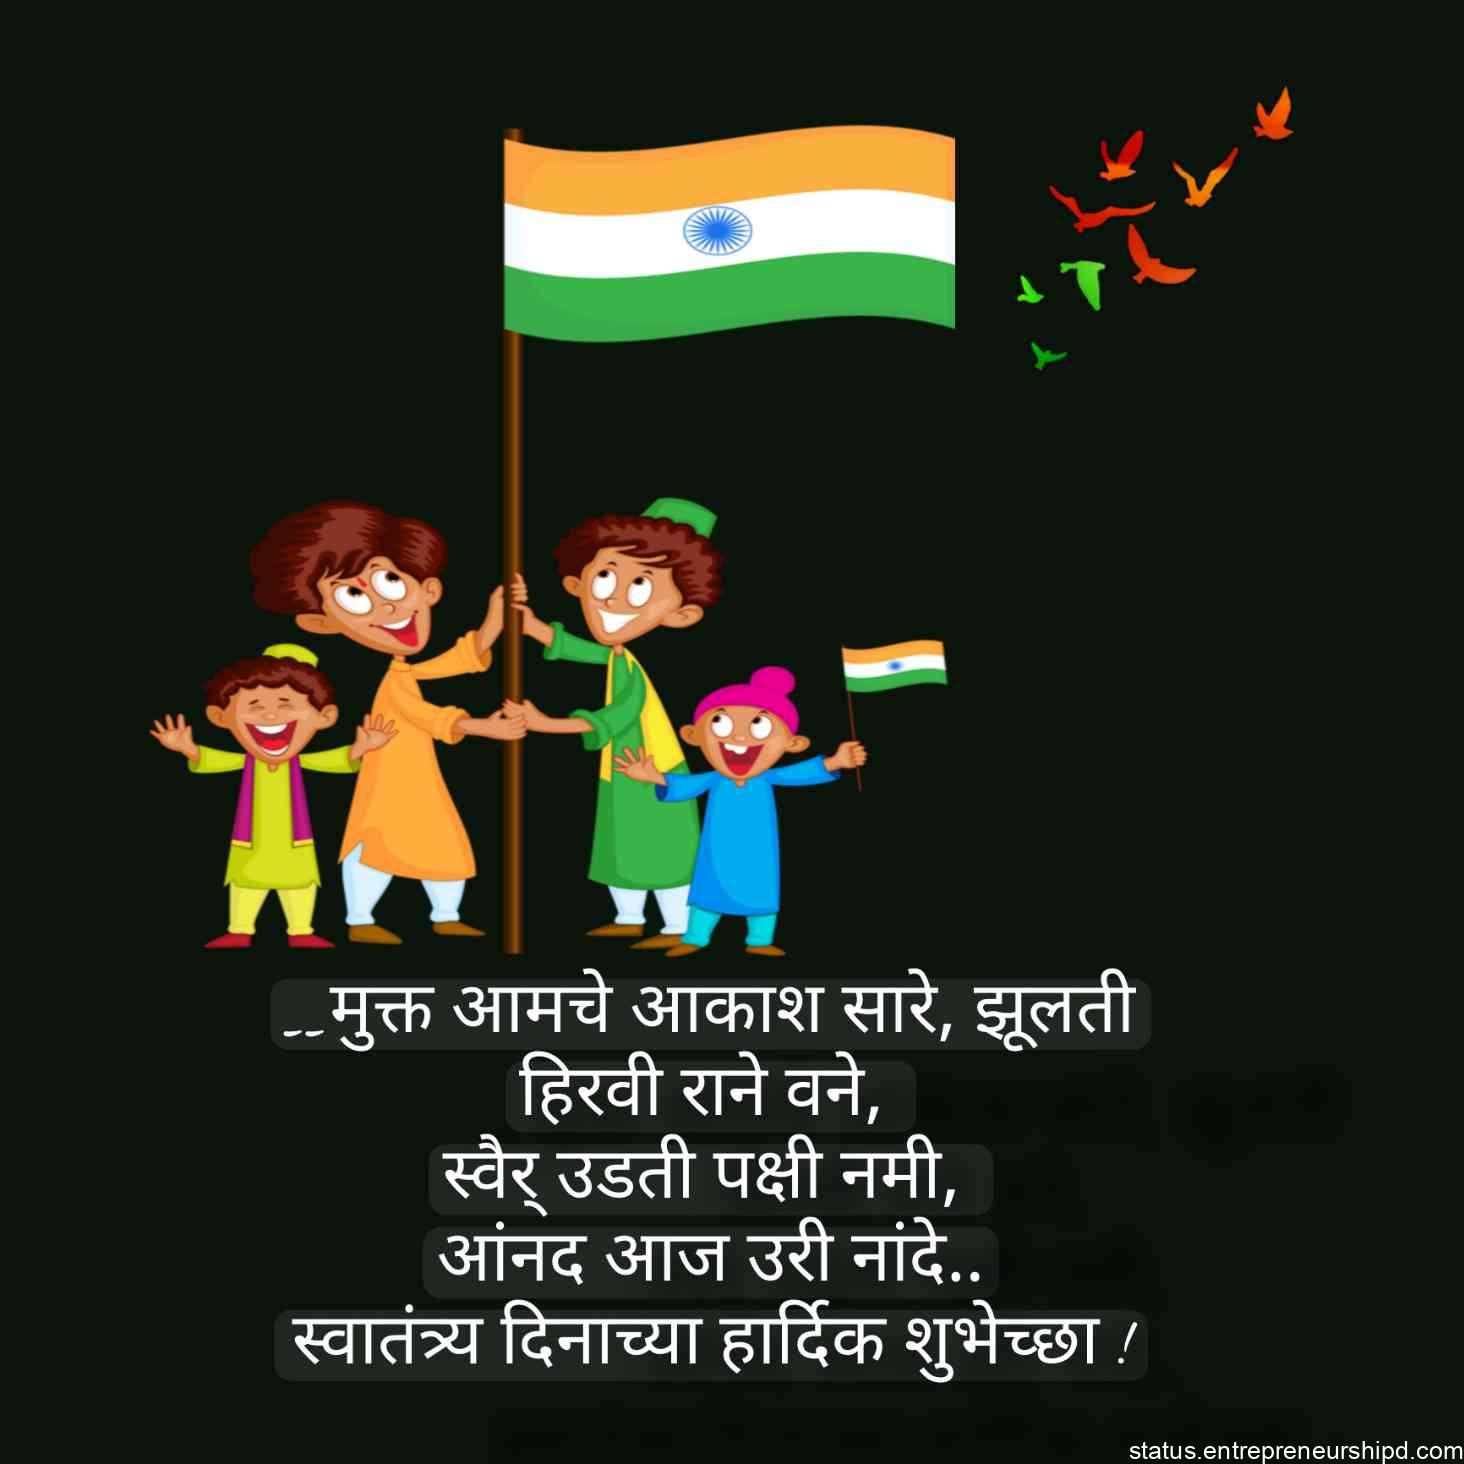 Independence day banner and Quotes in Marathi